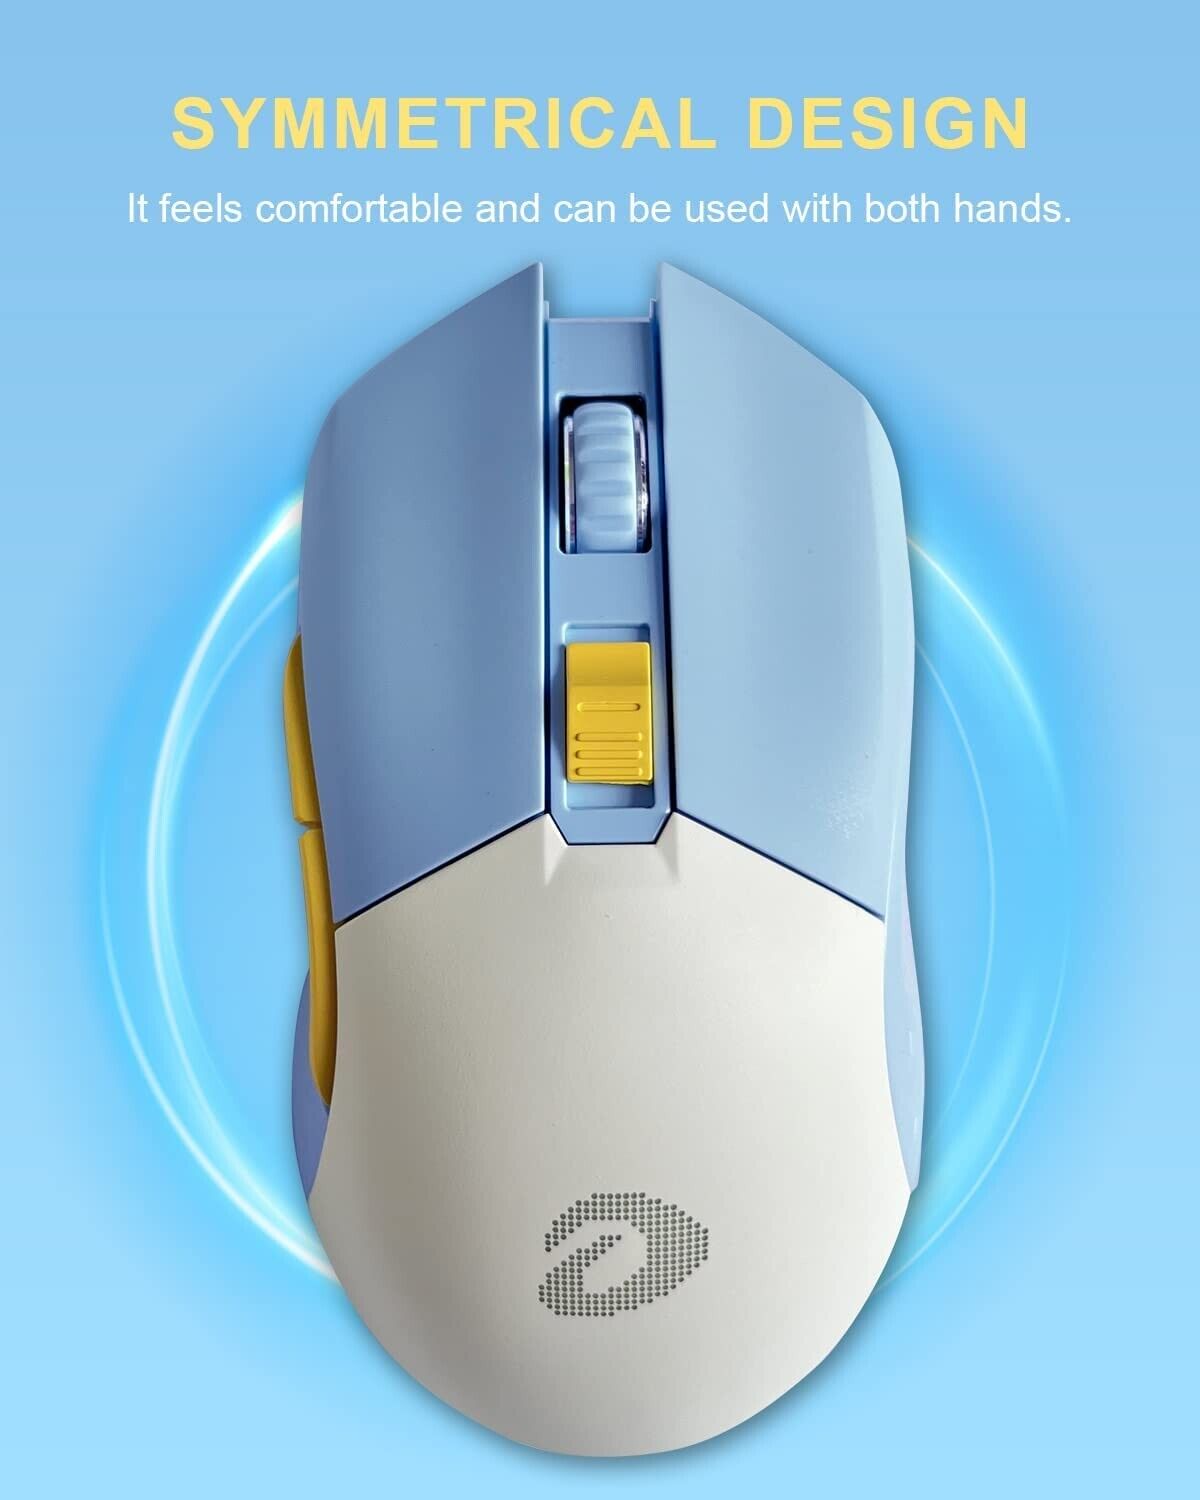 Wireless Wired Gaming Mouse DAREU Dual-Mode Rechargeable 7 Programmable Buttons - Ricky's Garage